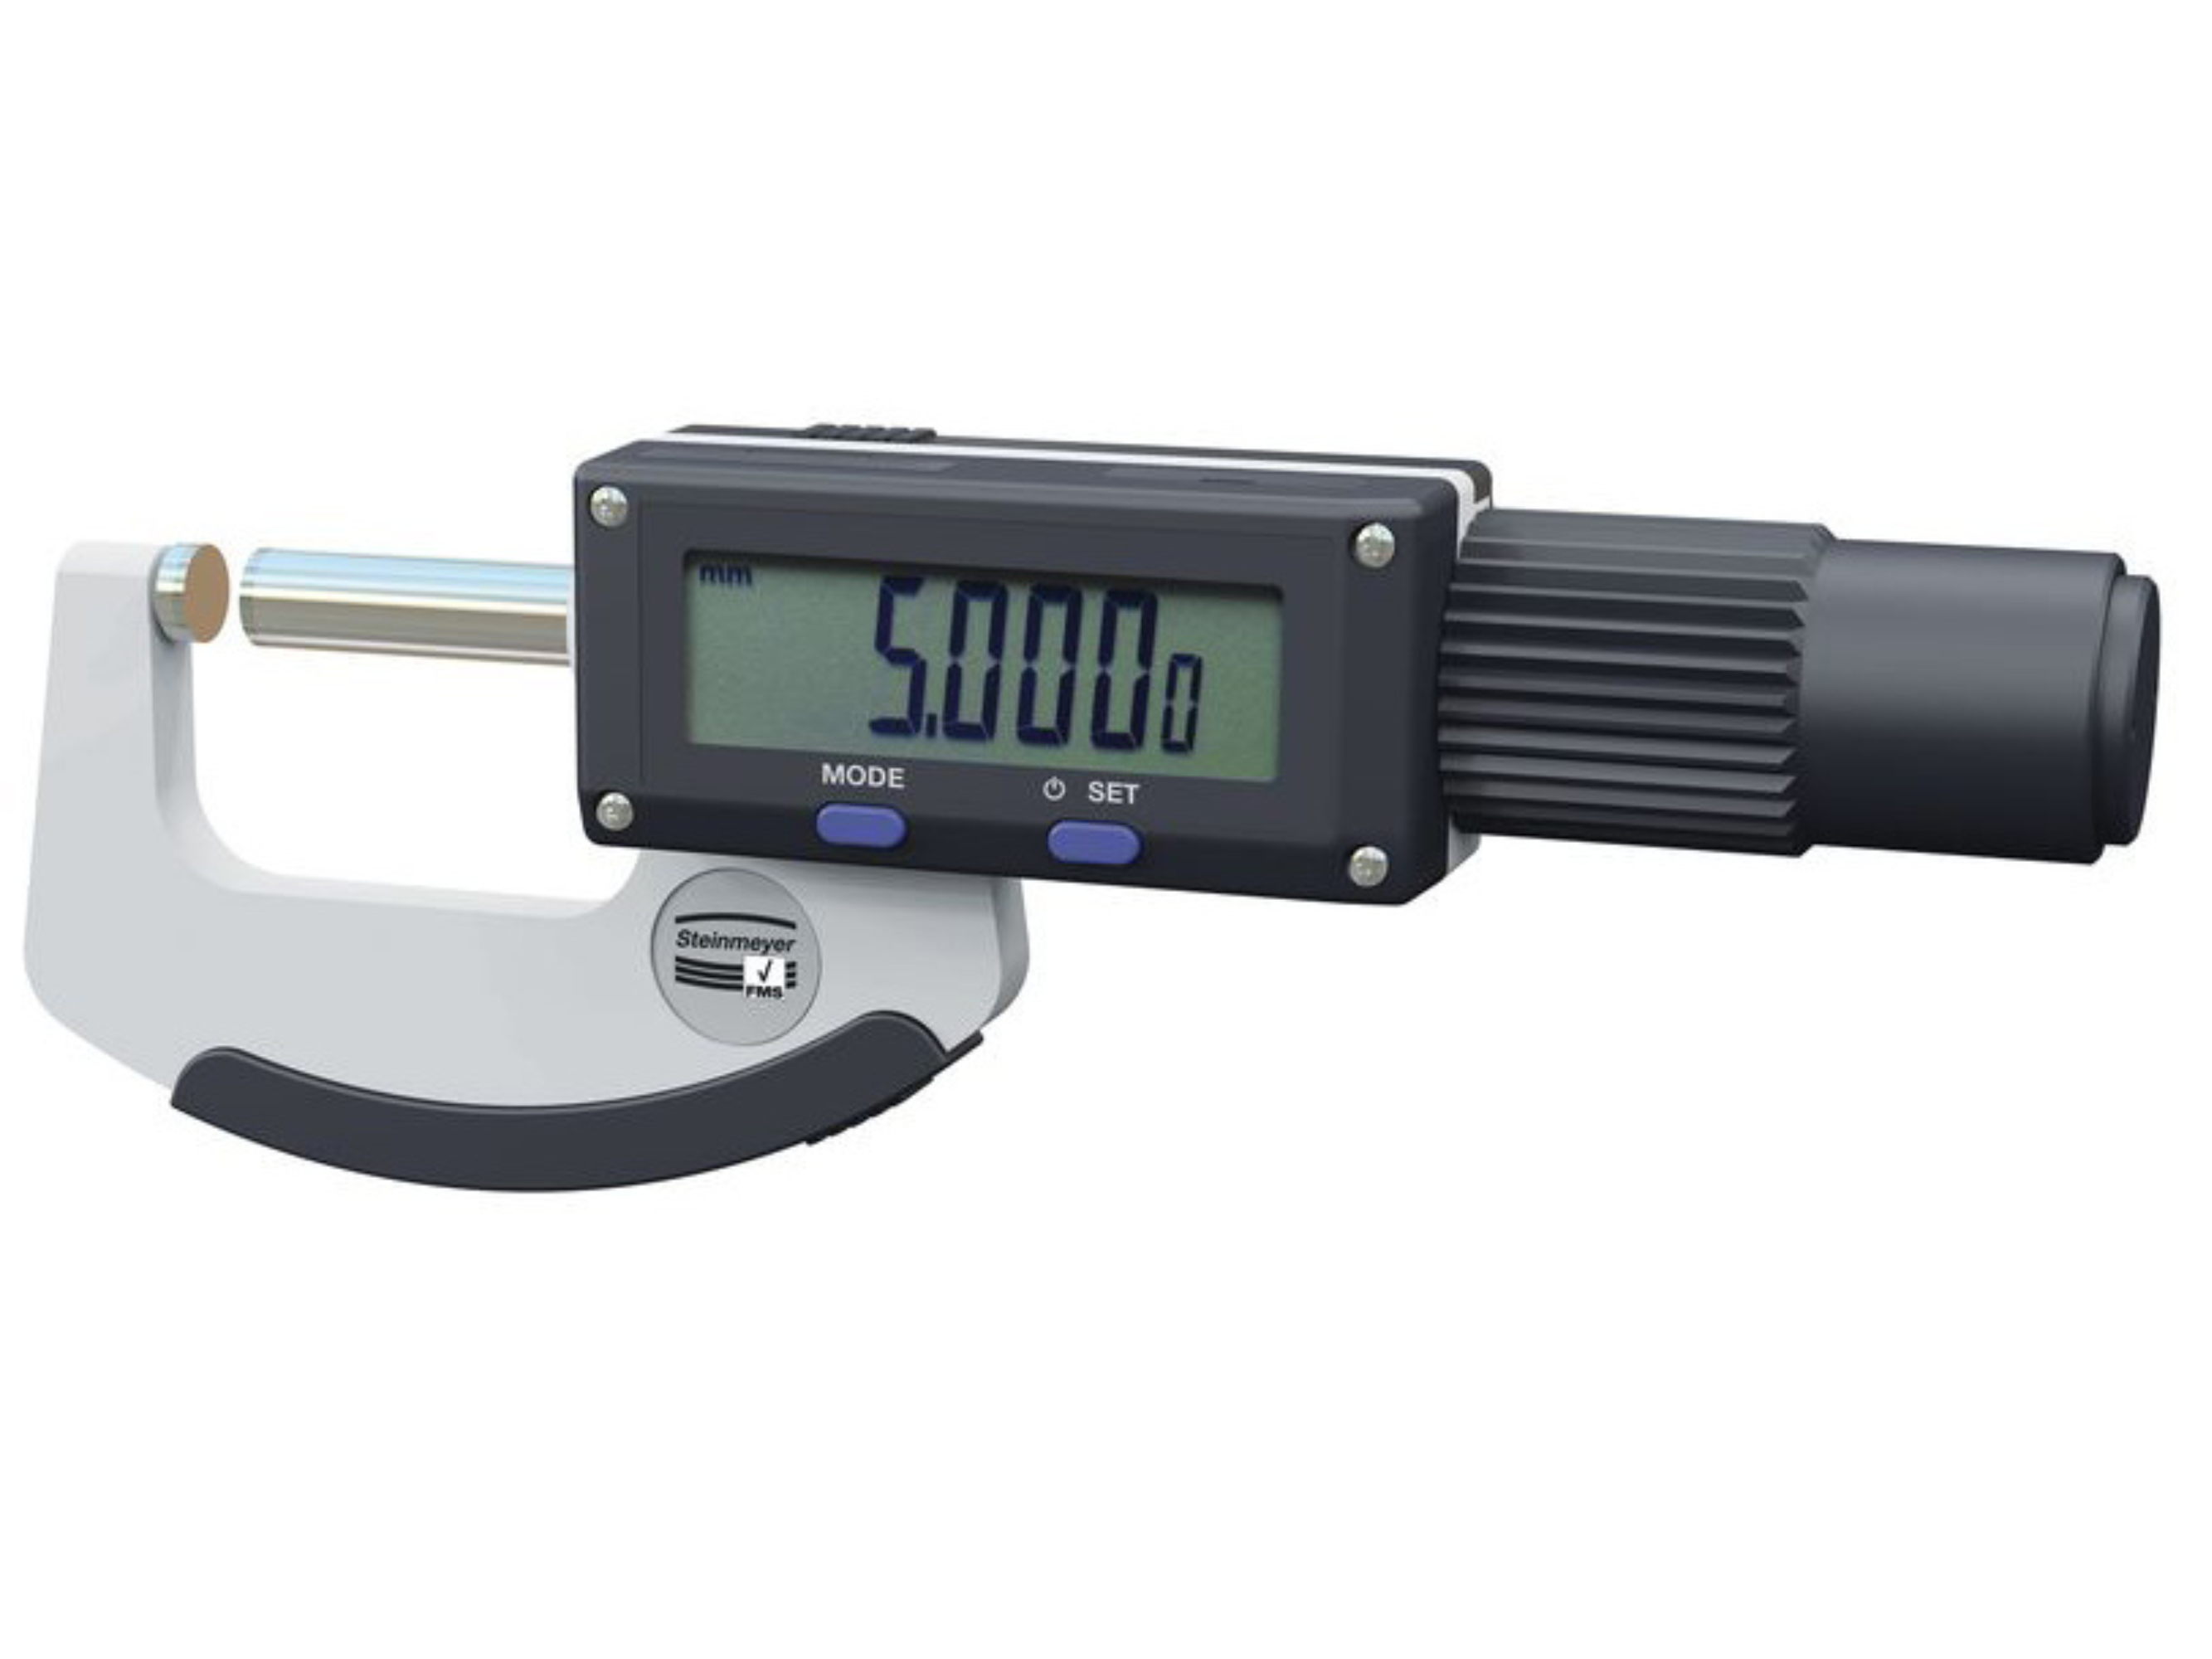 Digital micrometer with non-rotating spindle 50-80mm